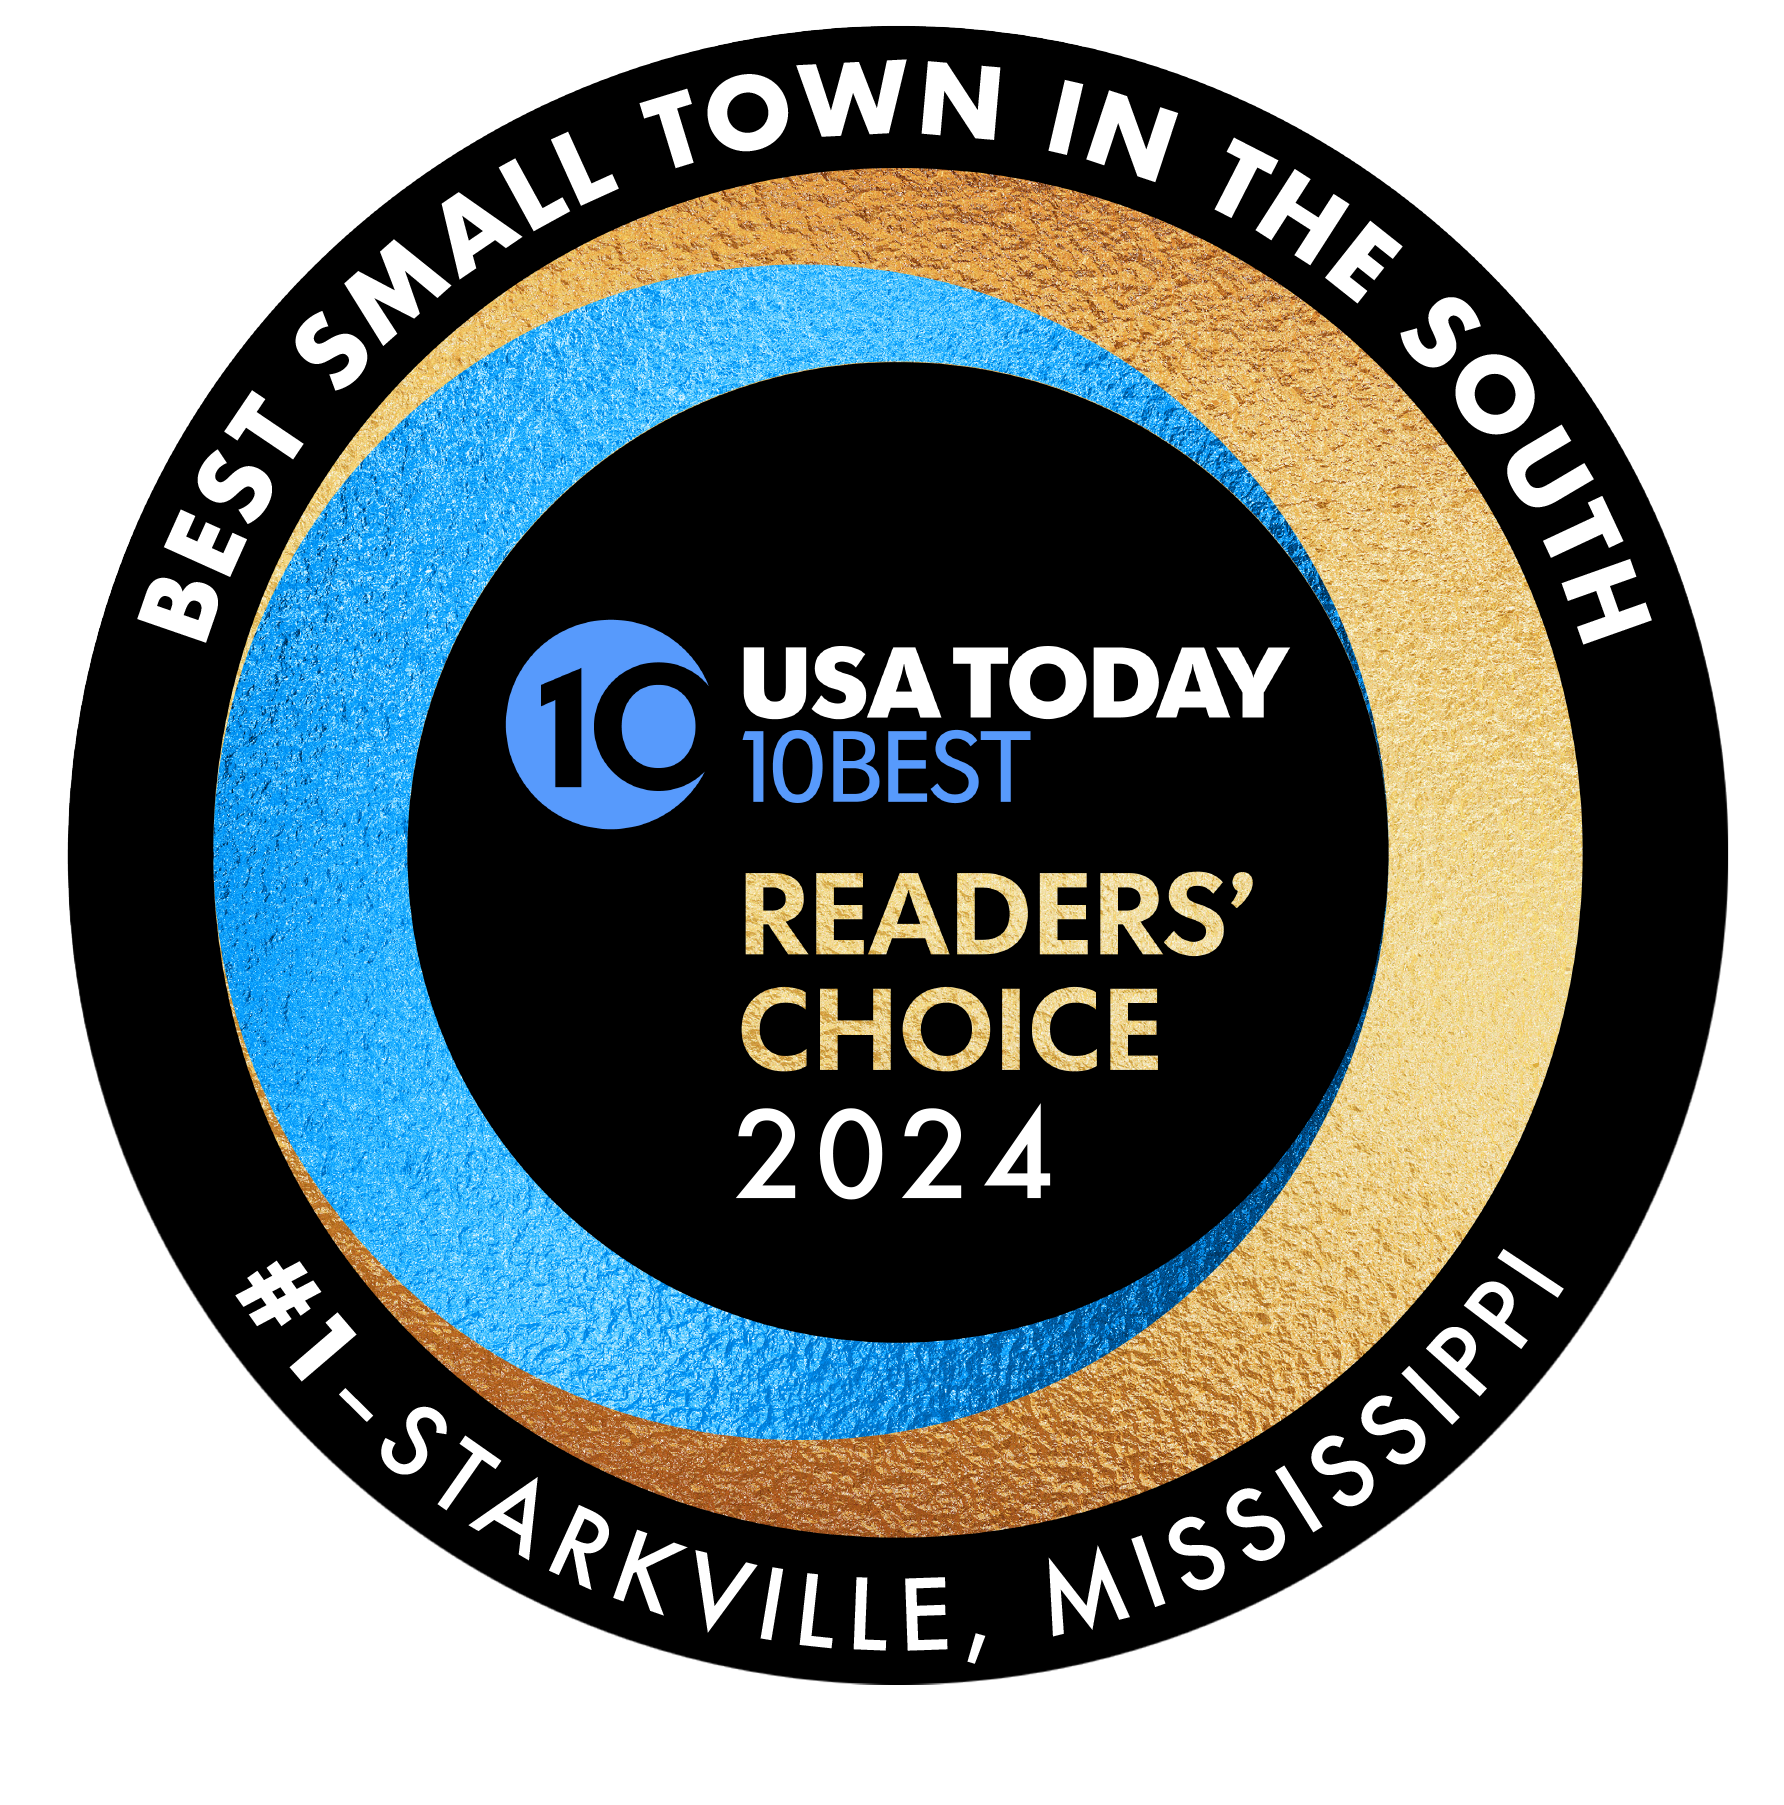 Best Small Town in the South badge from USA Today Reader's Choice awards 2024.